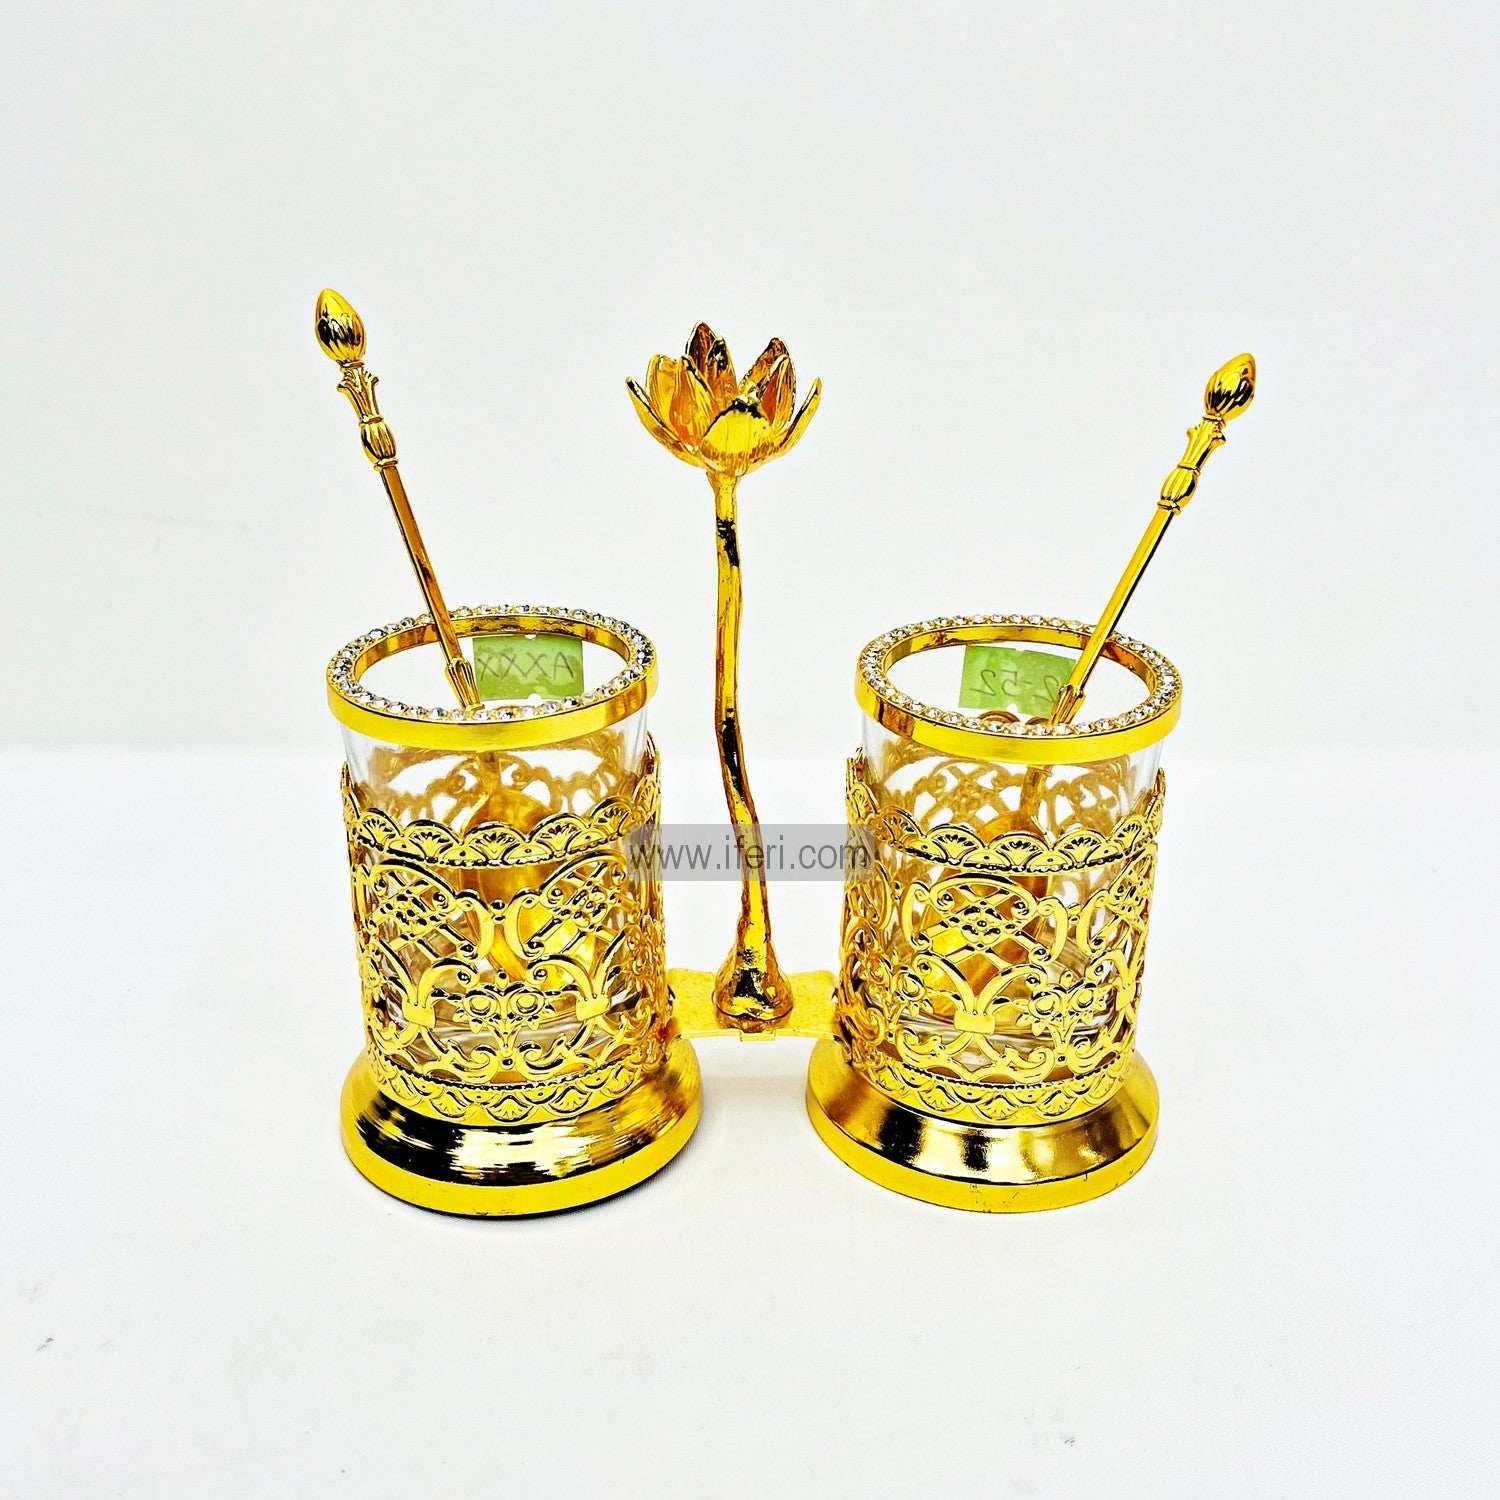 2 Pcs Metal & Glass Spoon Holder with Spoon RY2238